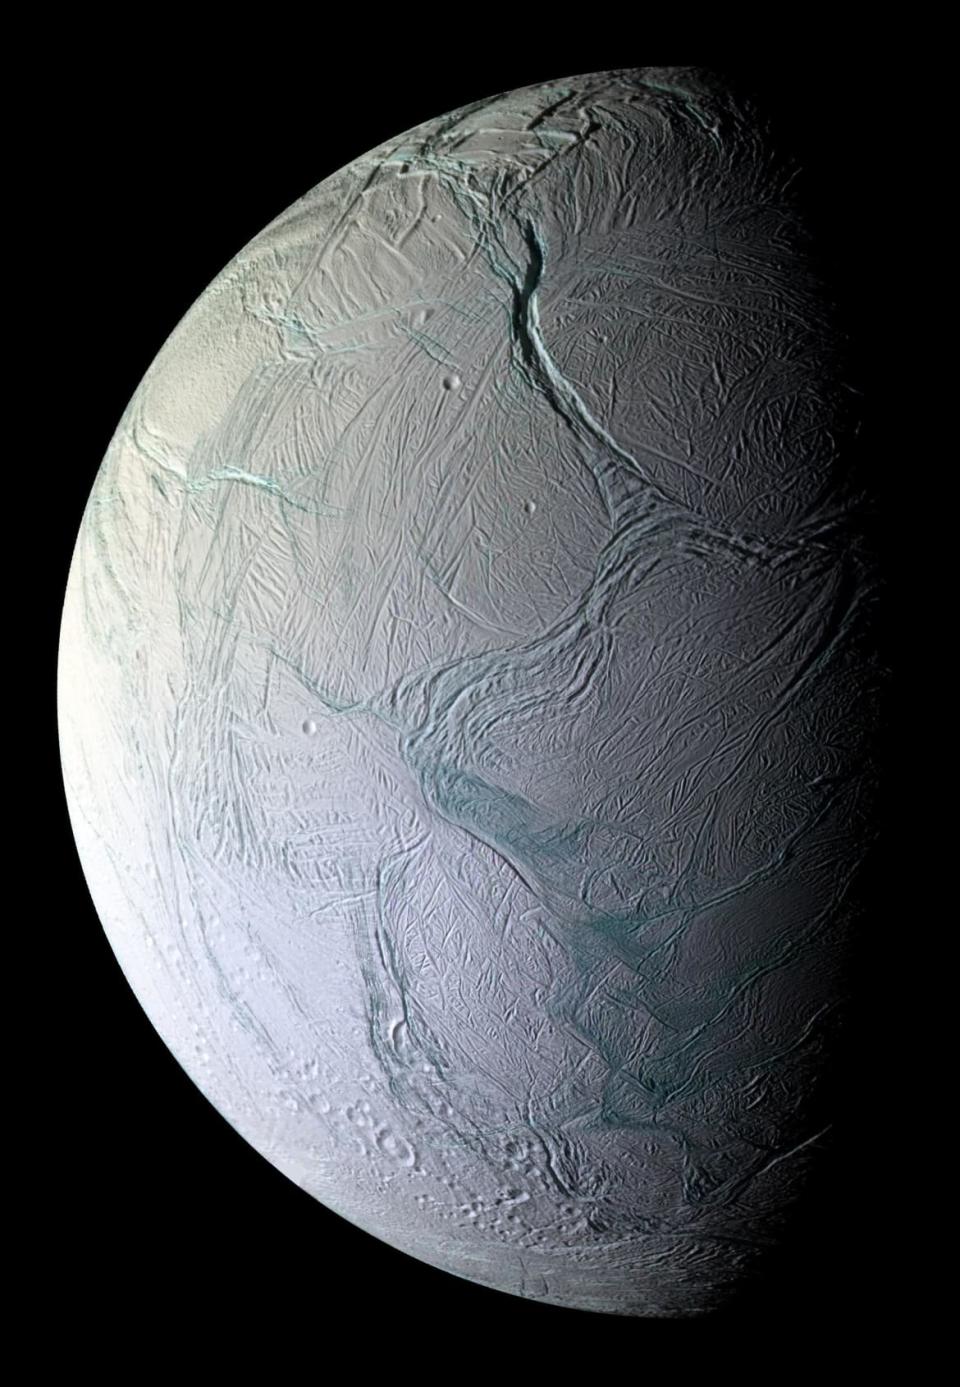 <div class="inline-image__caption"><p>NASA’s Cassini captured this image of the surface of Enceladus on Oct. 9, 2008.</p></div> <div class="inline-image__credit">NASA/JPL/Space Science Institute</div>